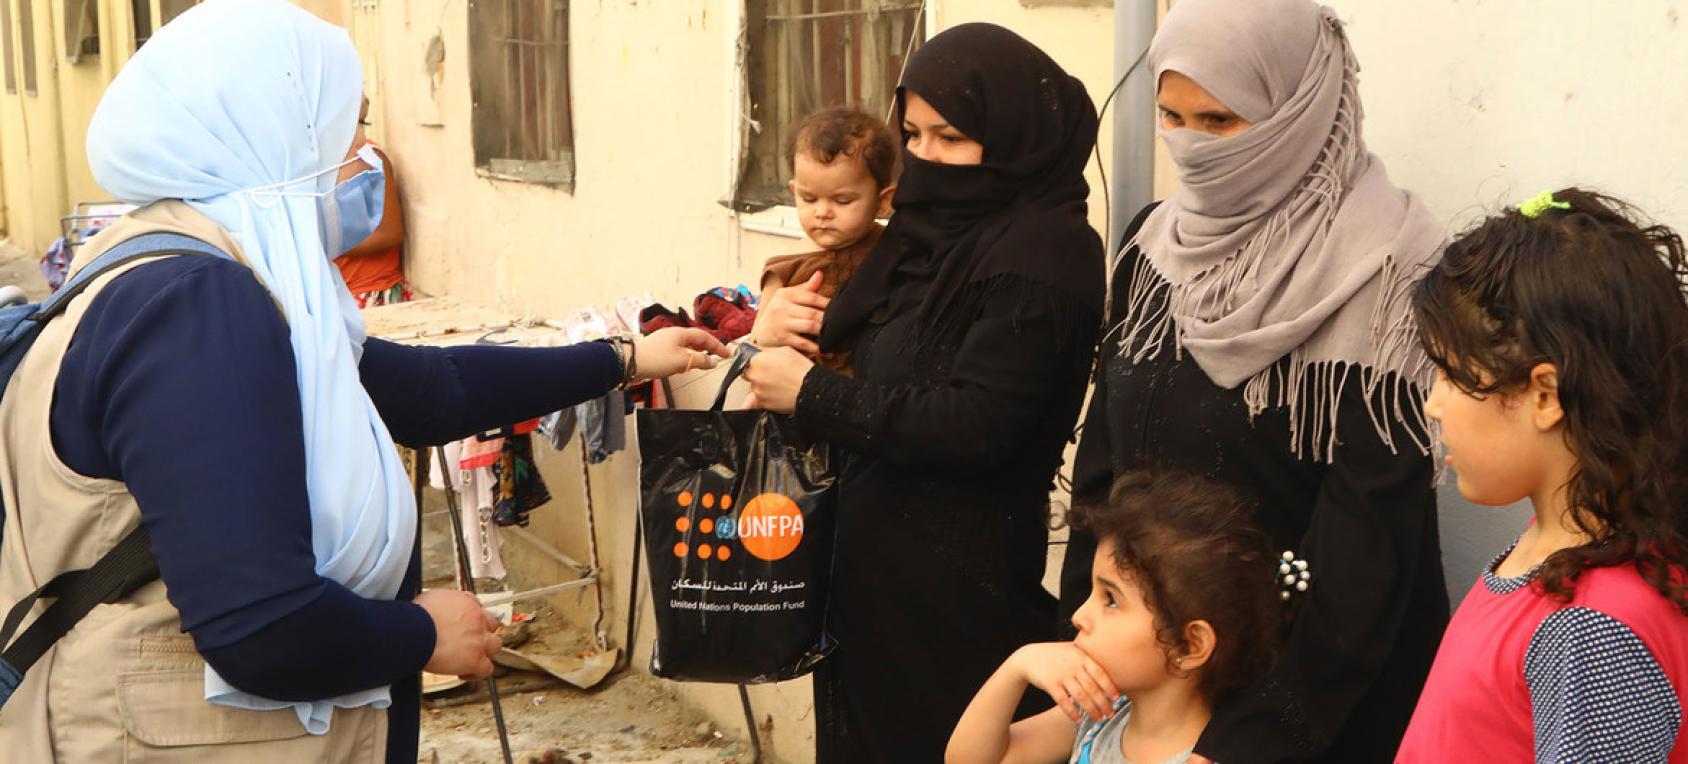 A UN staffer hands a woman with a child in her arms, a kit in a black bag, while another woman stands near two other children. 